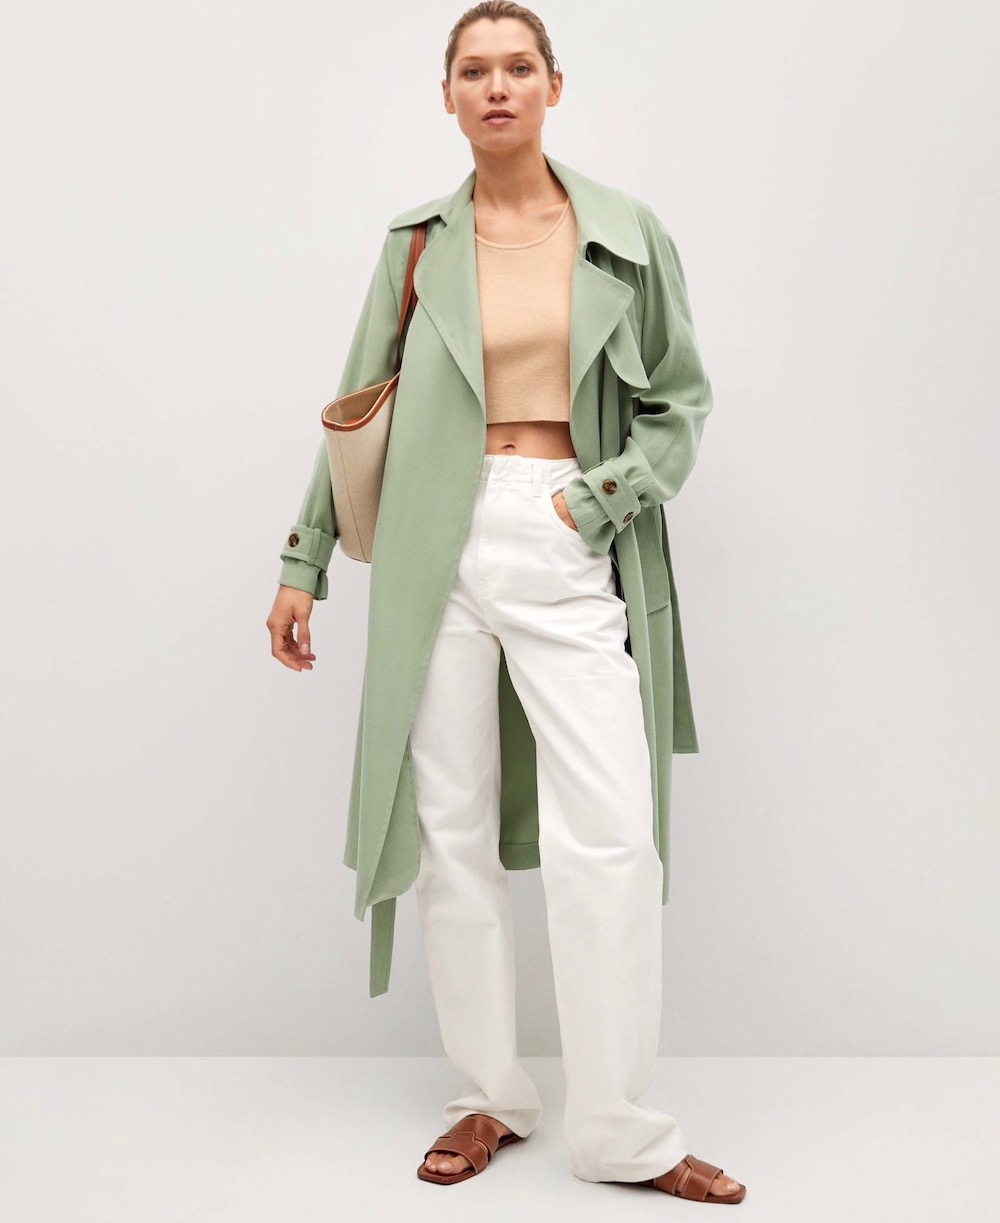 Sage Green Is the Unofficial Color of Spring 2021 - theFashionSpot